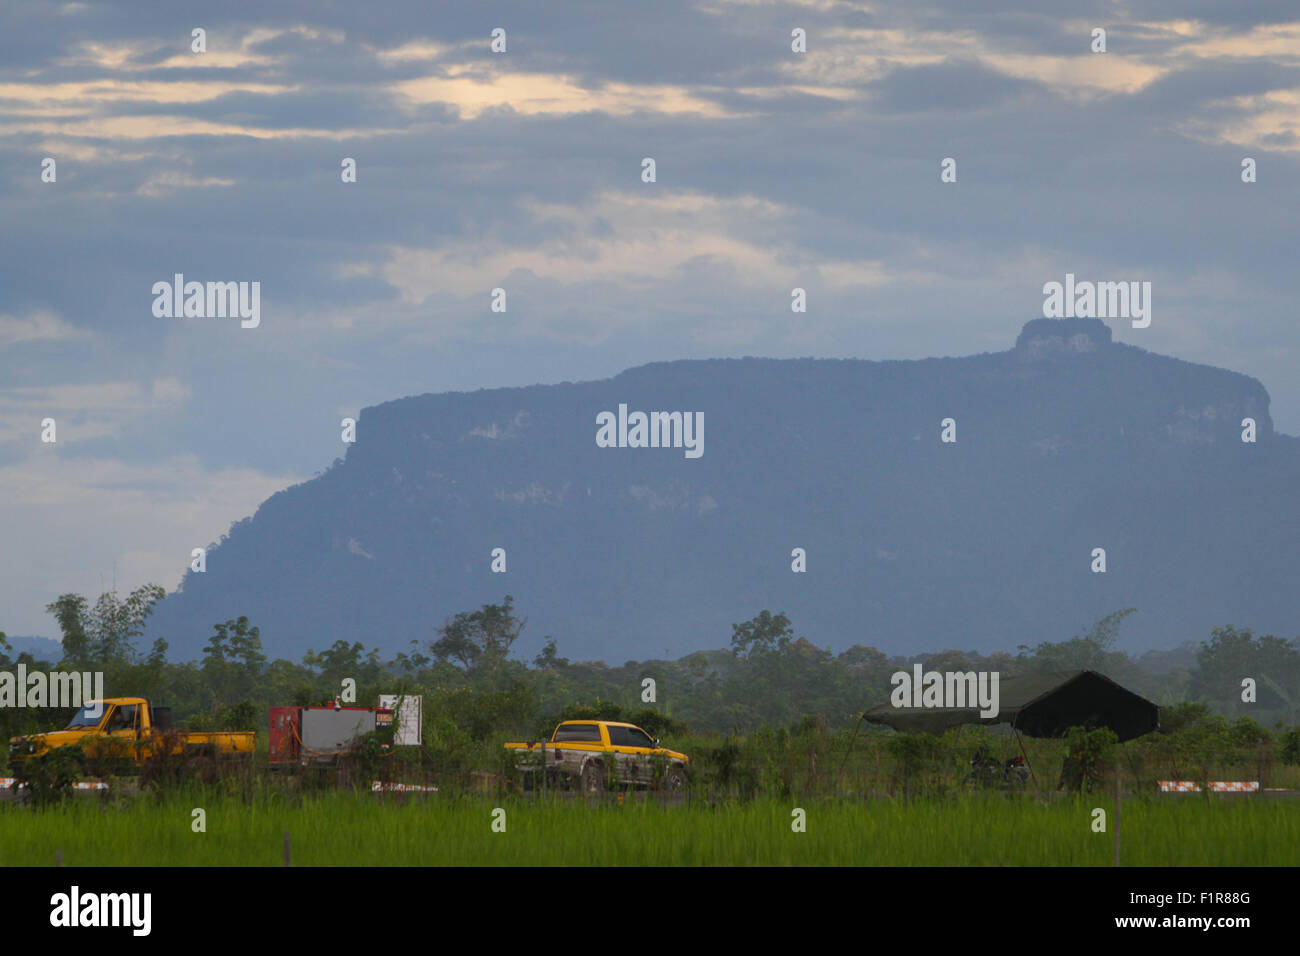 Bukit Tilung, a sacred mountain in traditional belief system of Dayak communities, is seen from Putussibau, Kapuas Hulu, West Kalimantan, Indonesia. Stock Photo